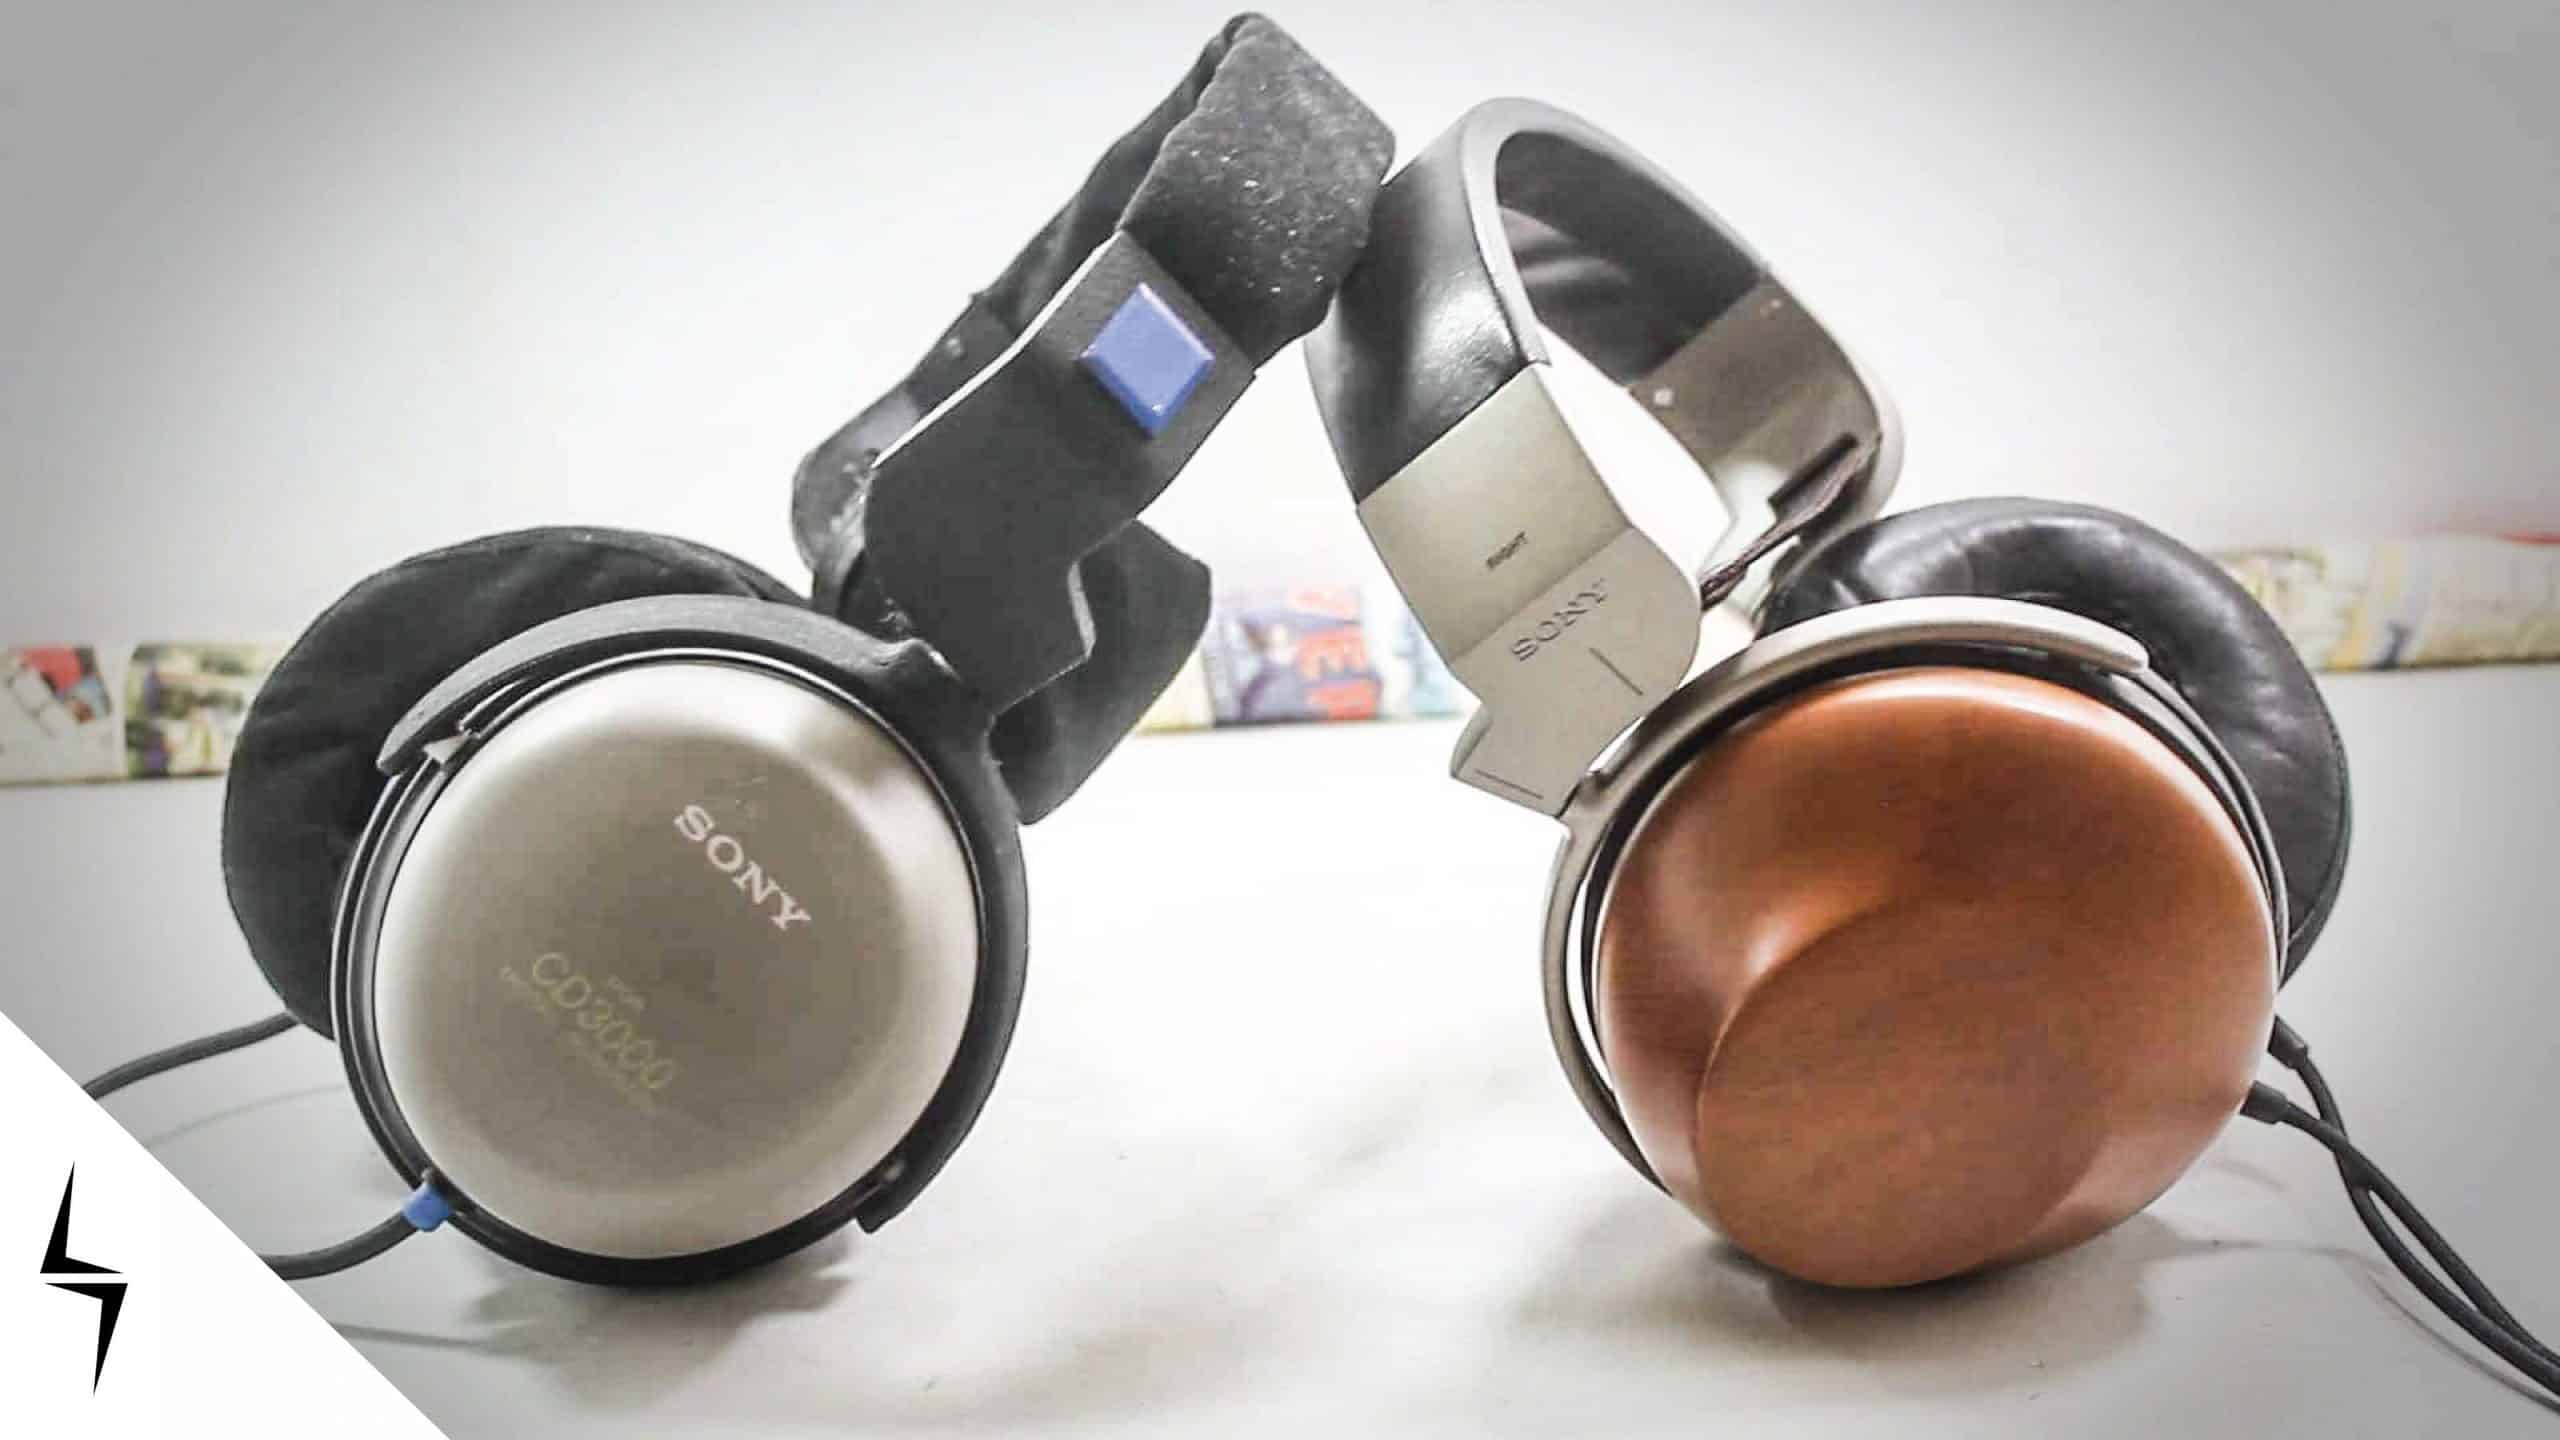 Most Expensive Headphone Brands - 20 Brands with Prices 2020